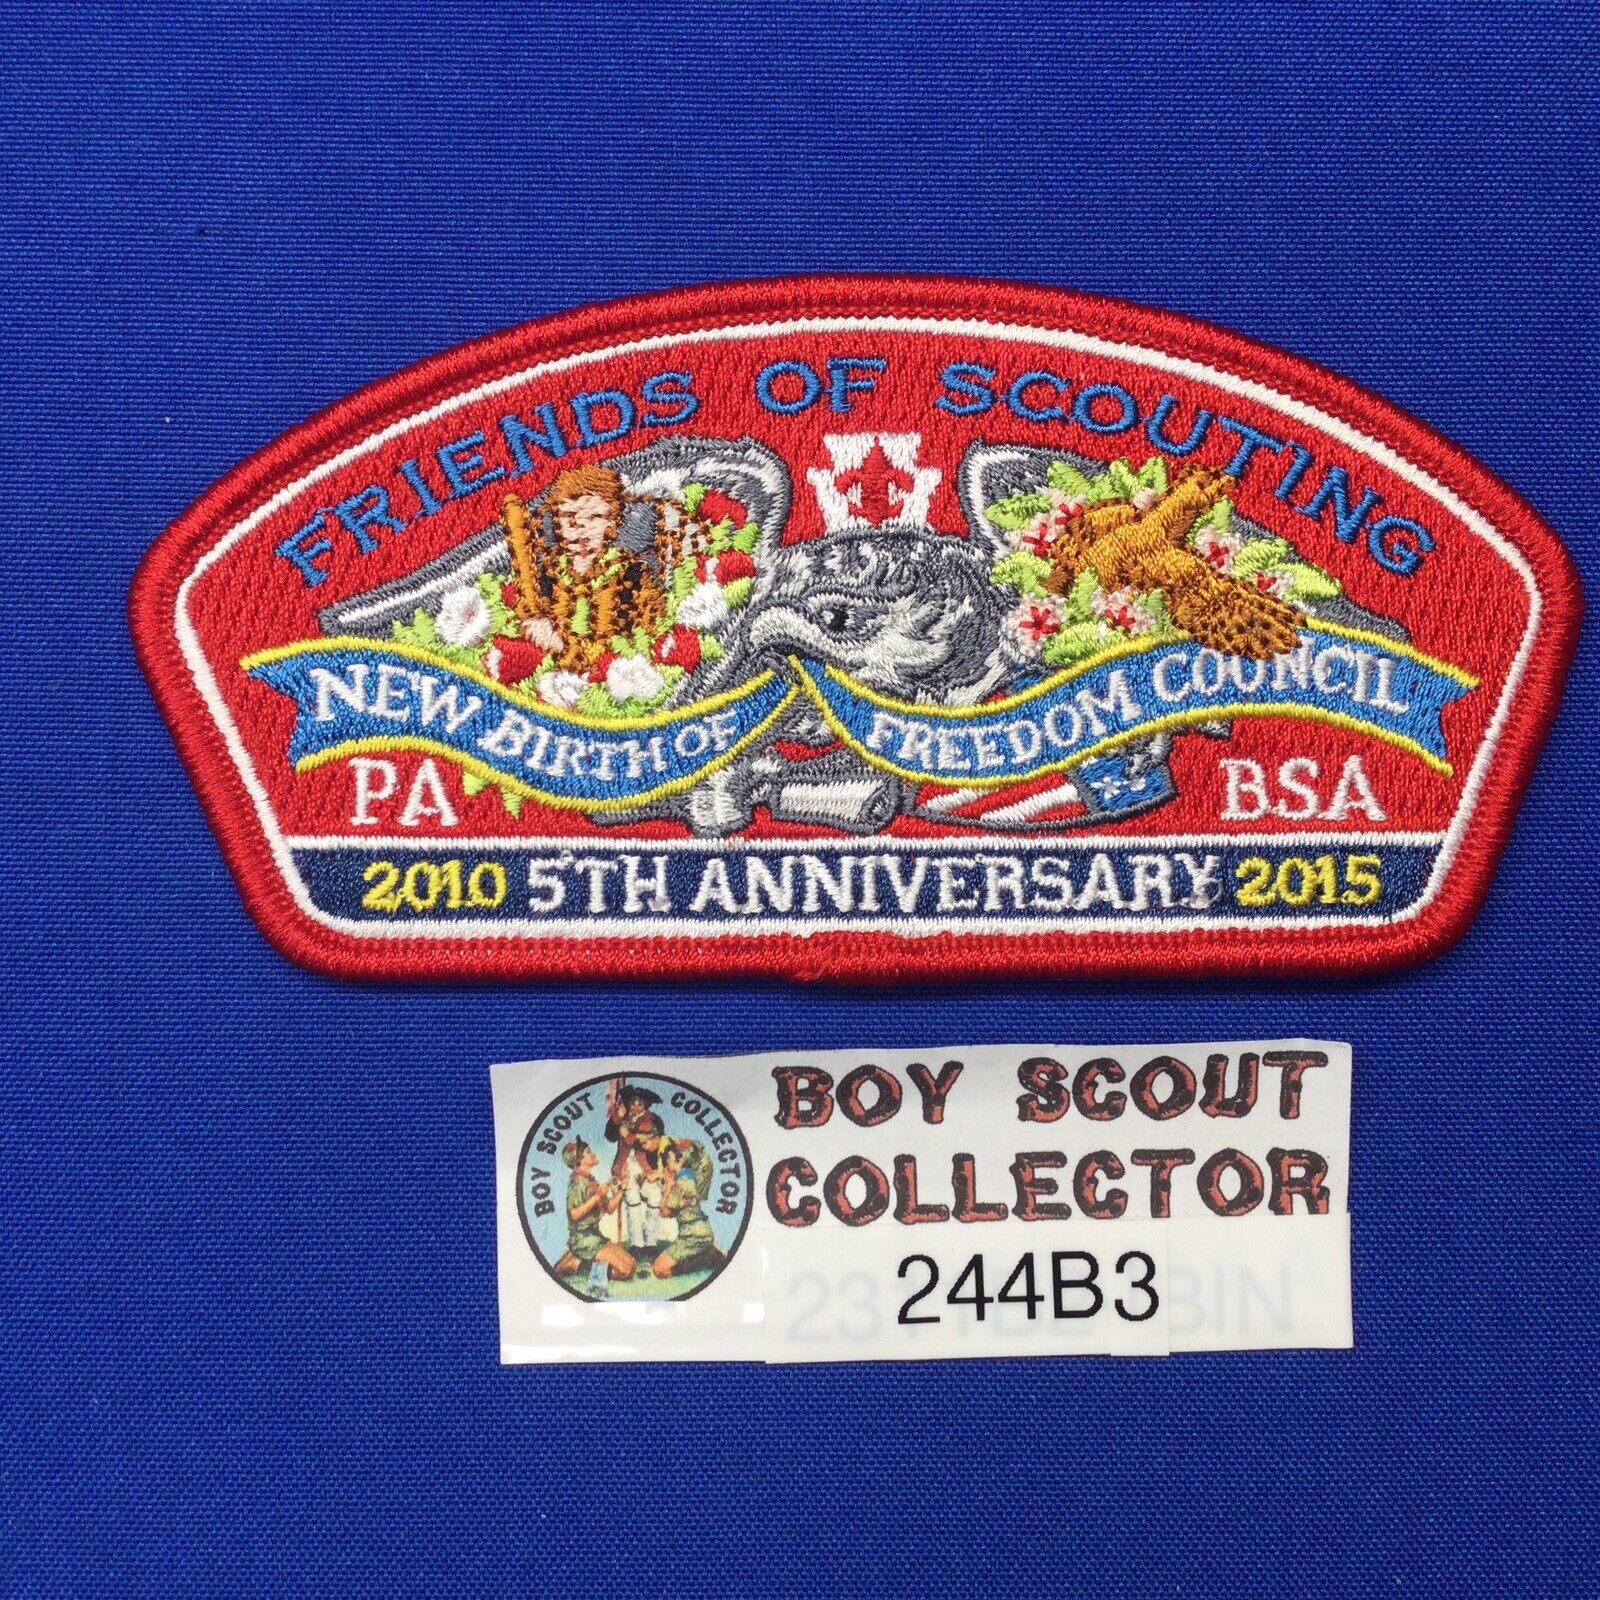 Boy Scout CSP New Birth Of Freedom Council 2015 5th Anniversary FOS Patch 244B3